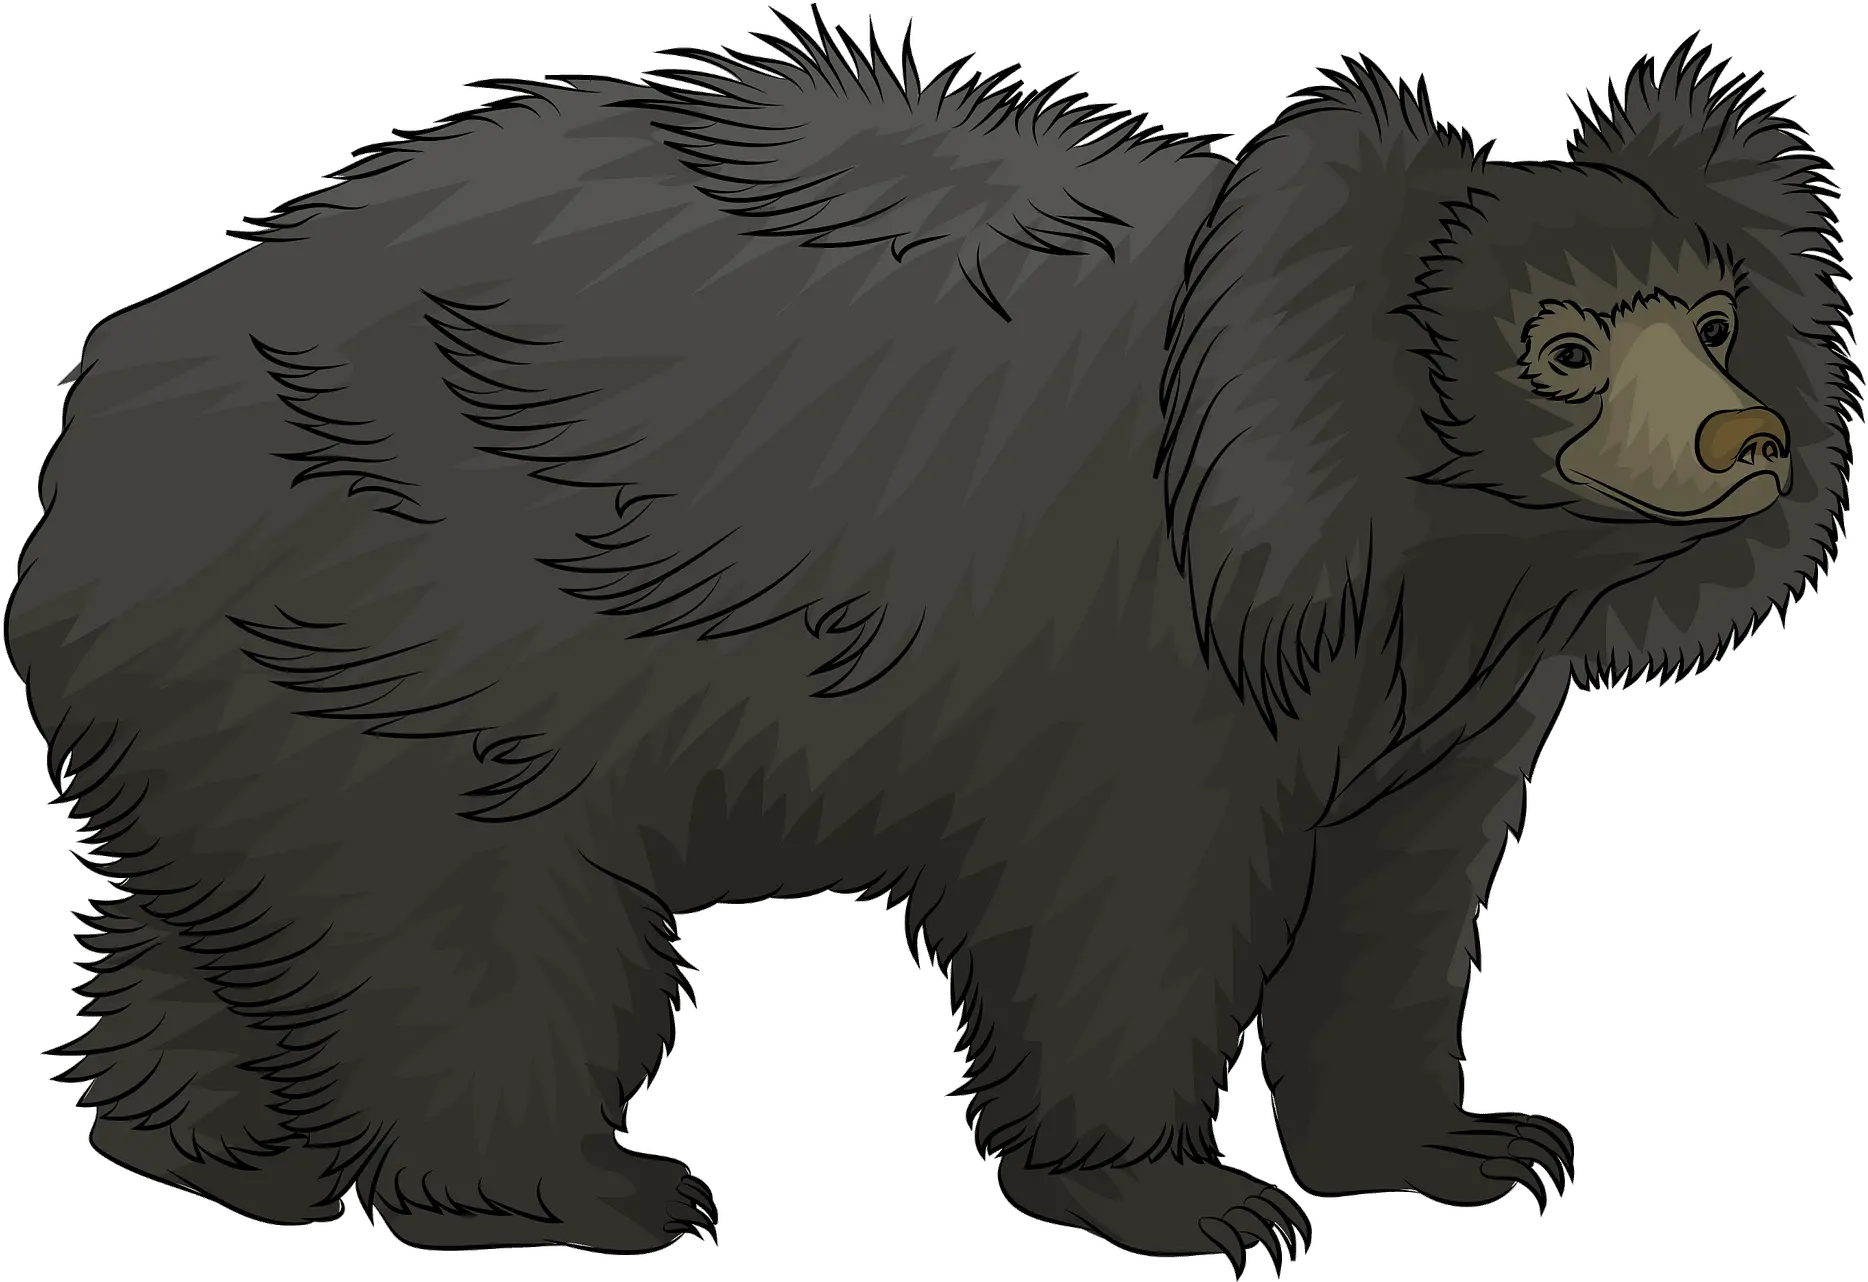 Sloth Bear Clipart Free Download Transparent Png Creazilla Sloth Bear Clipart Sloth Transparent